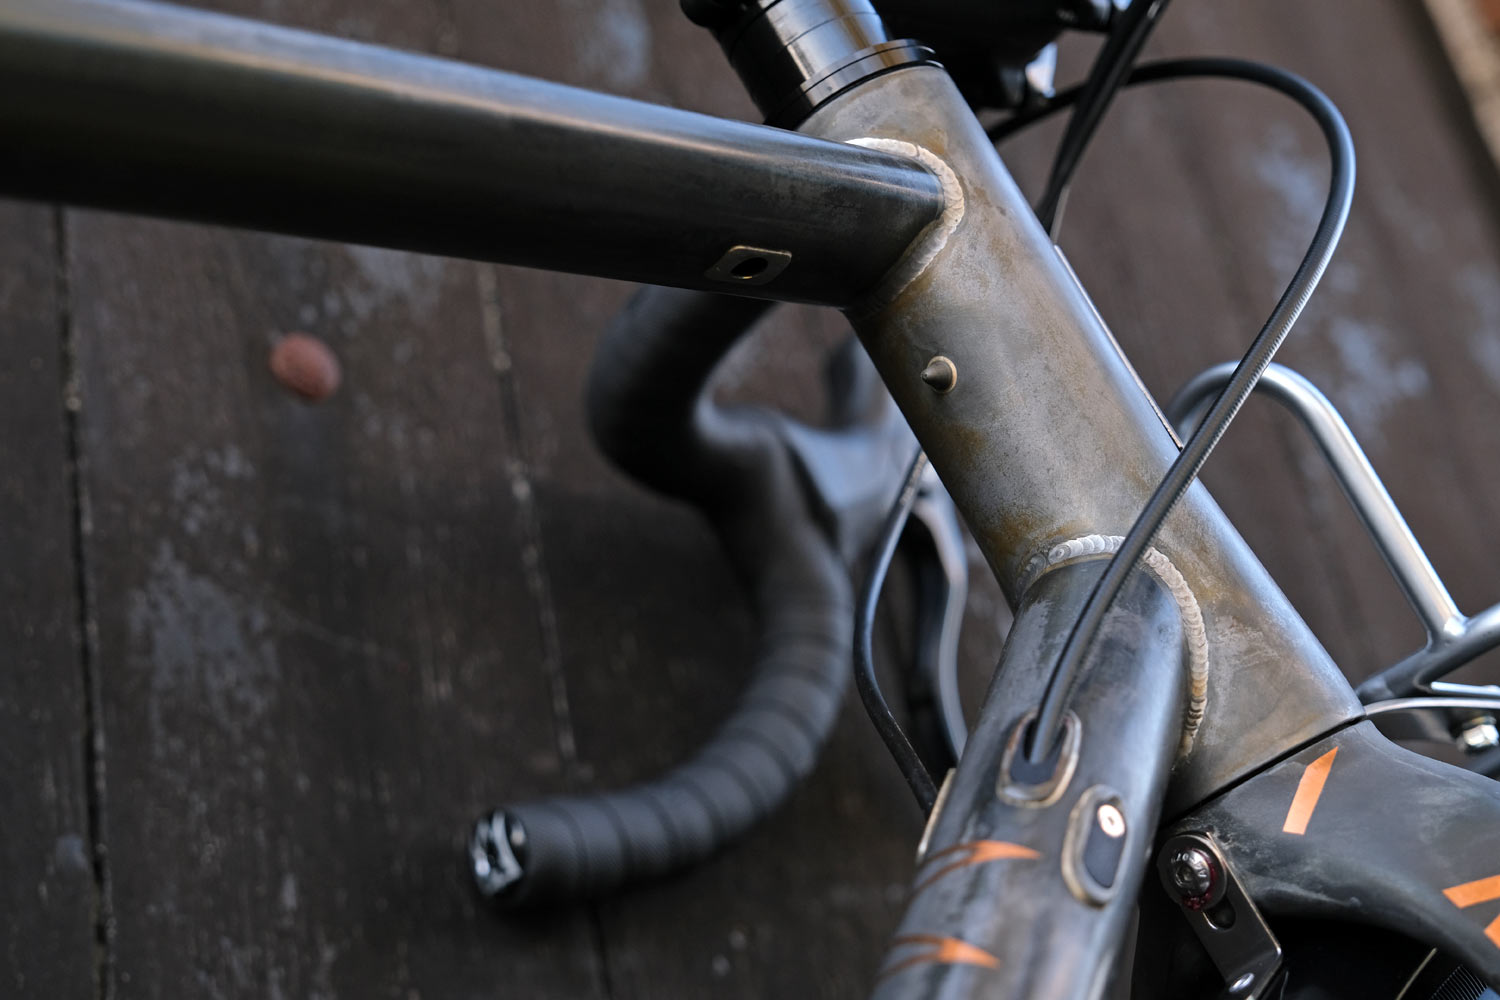 Mason SLR LE steel all-road adventure touring bikepacking bike, limited Launch Edition, pump peg, dynamo & cable routing